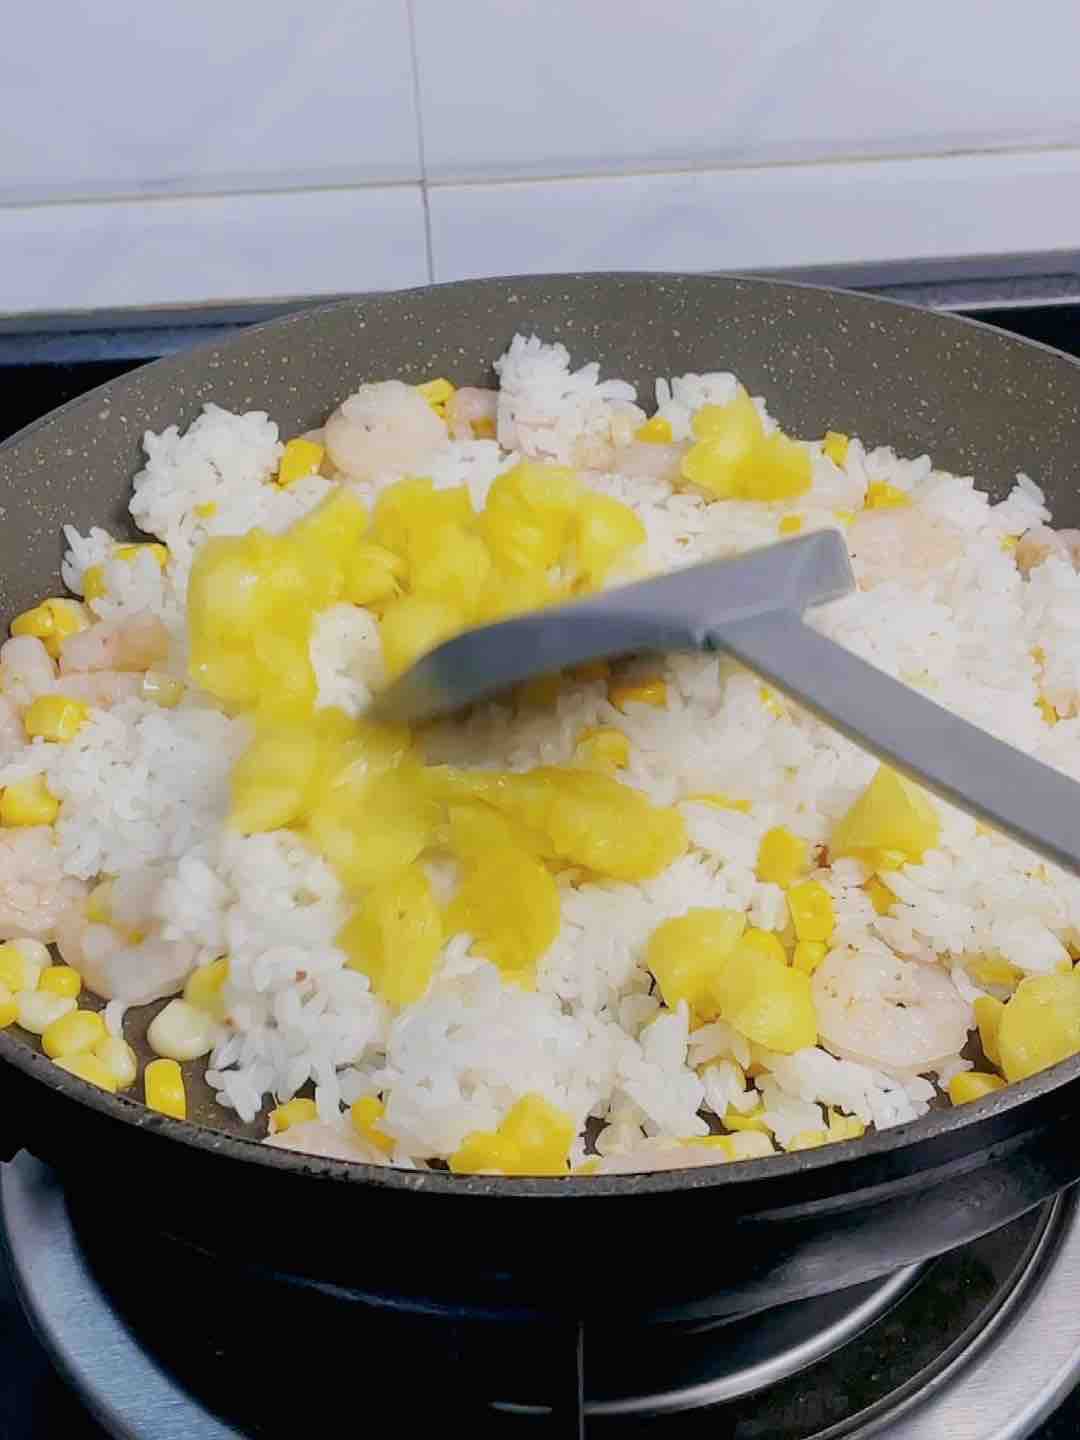 Stunning Pineapple and Shrimp Fried Rice ❗️❗️ Appetizing and Happy recipe